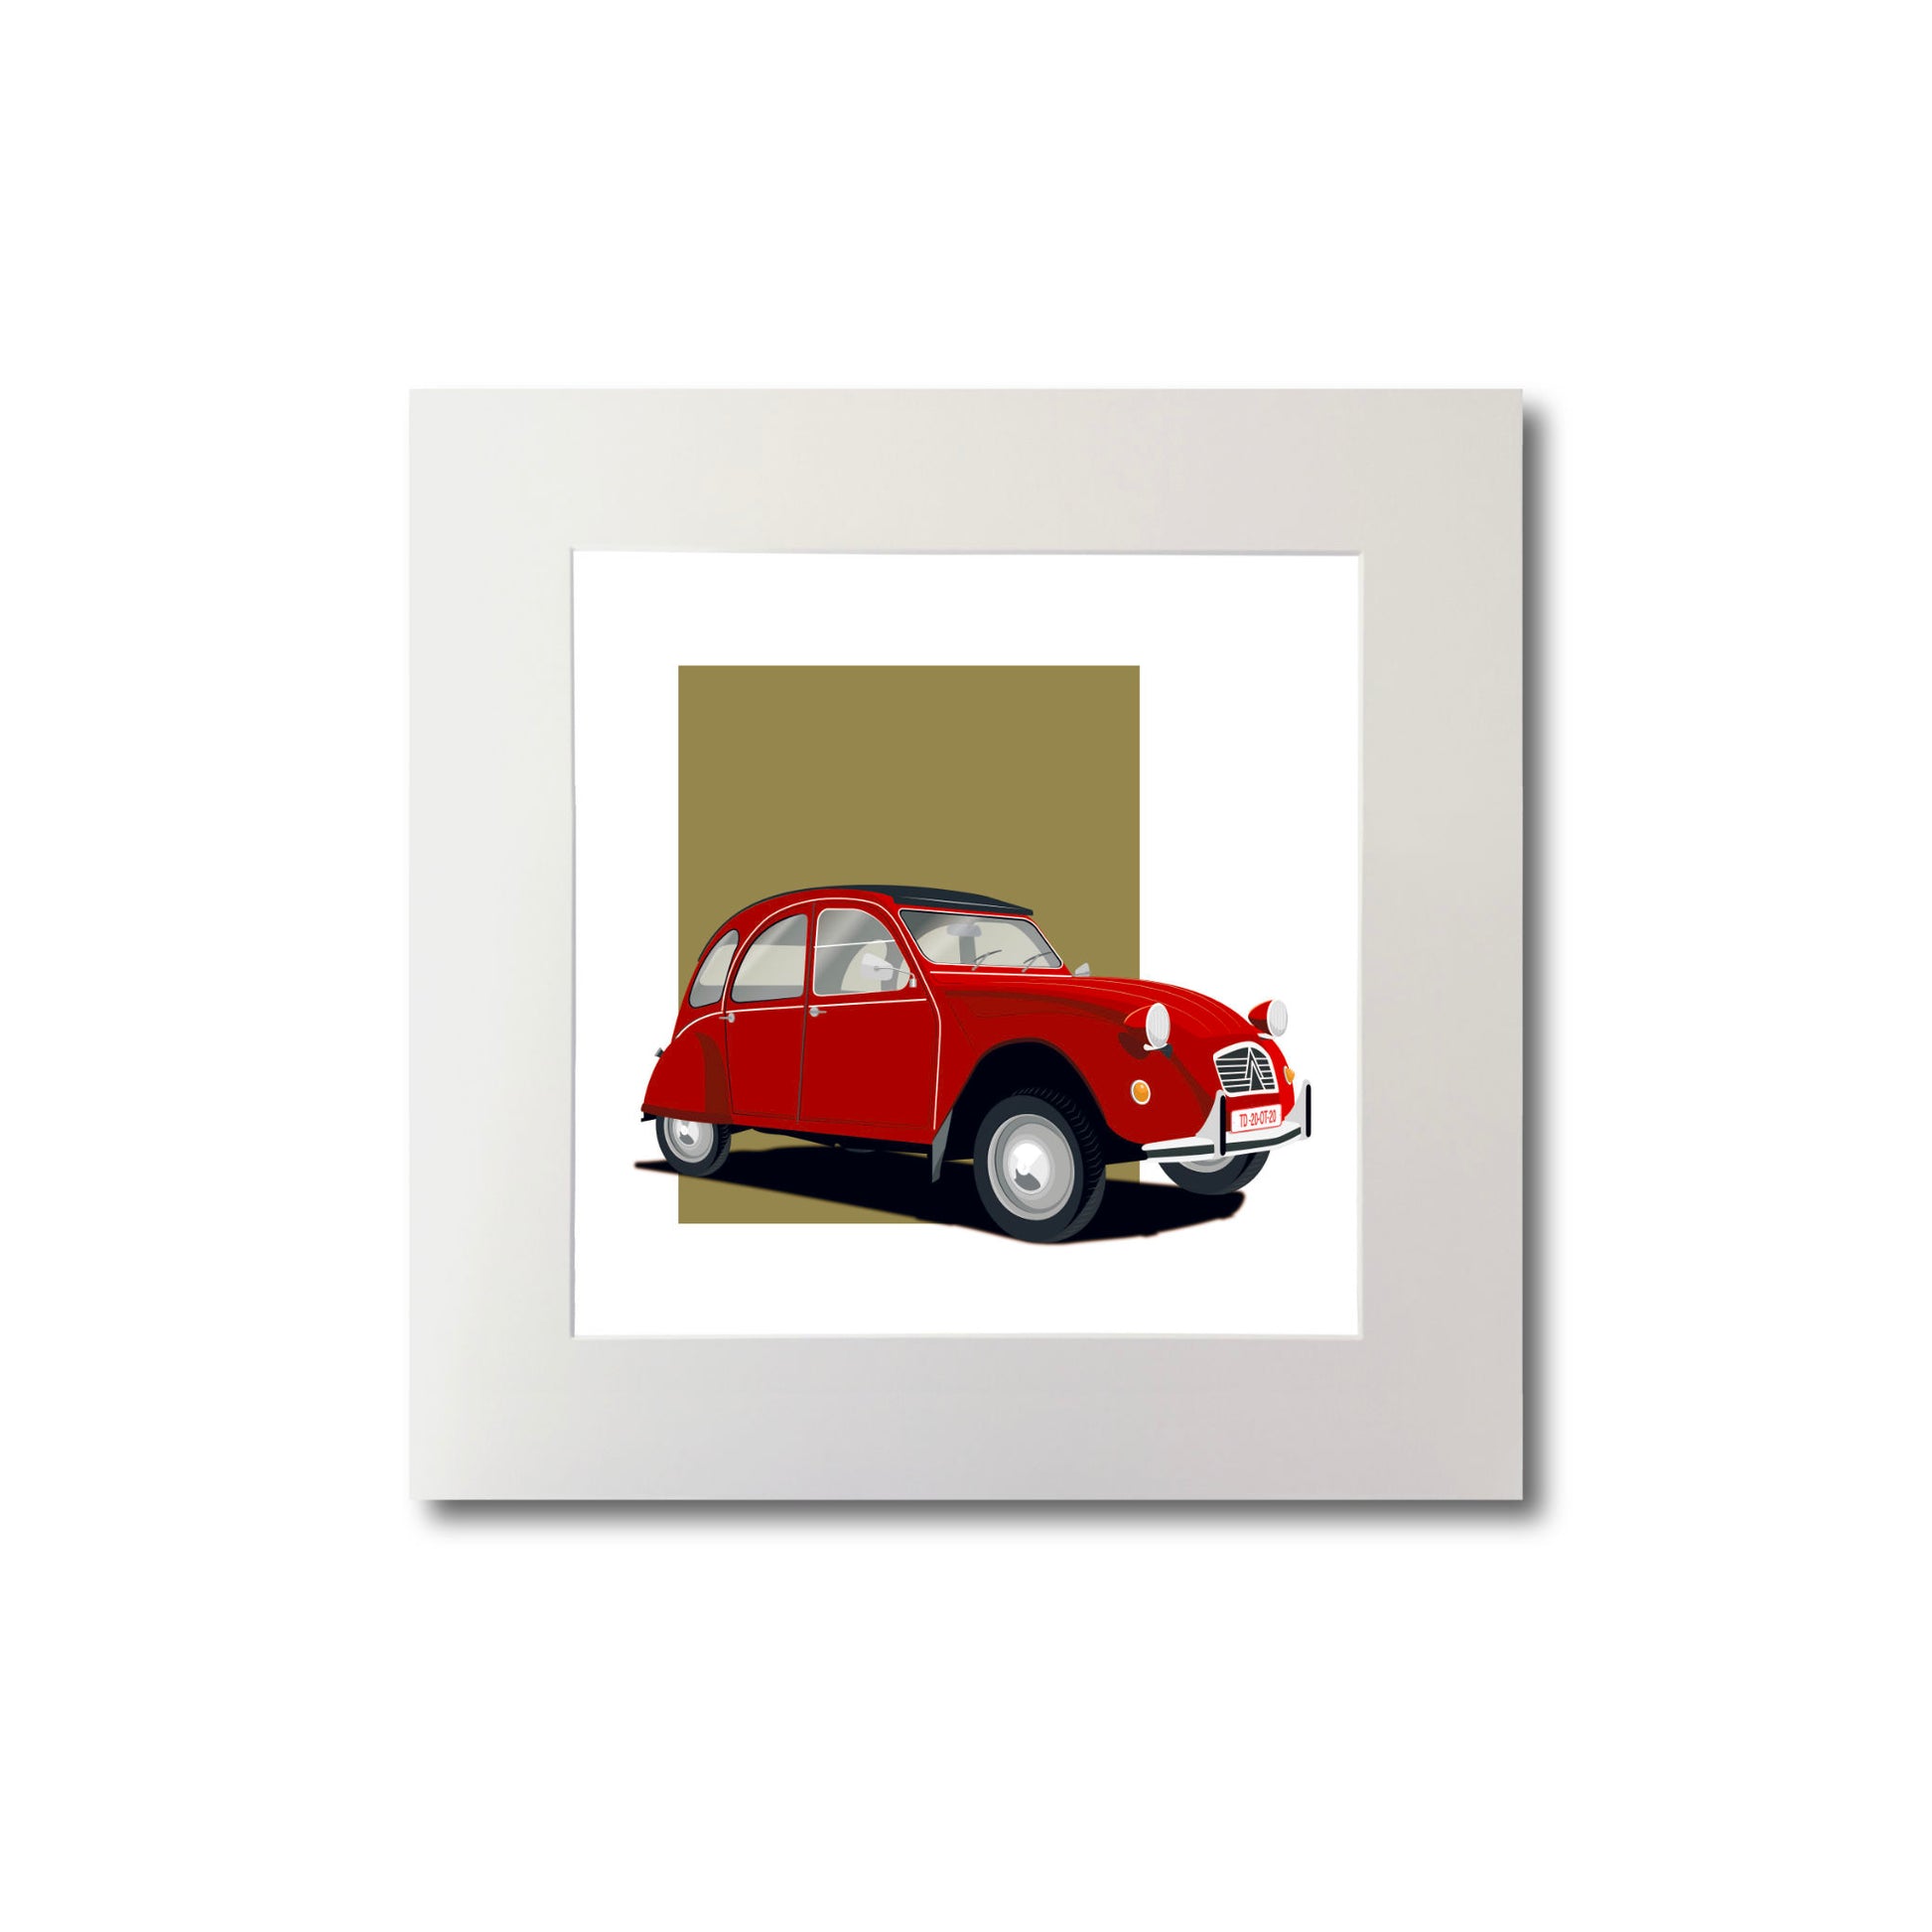 Illustration of a red Citroën 2CV, mounted and measuring 20 by 20 cm